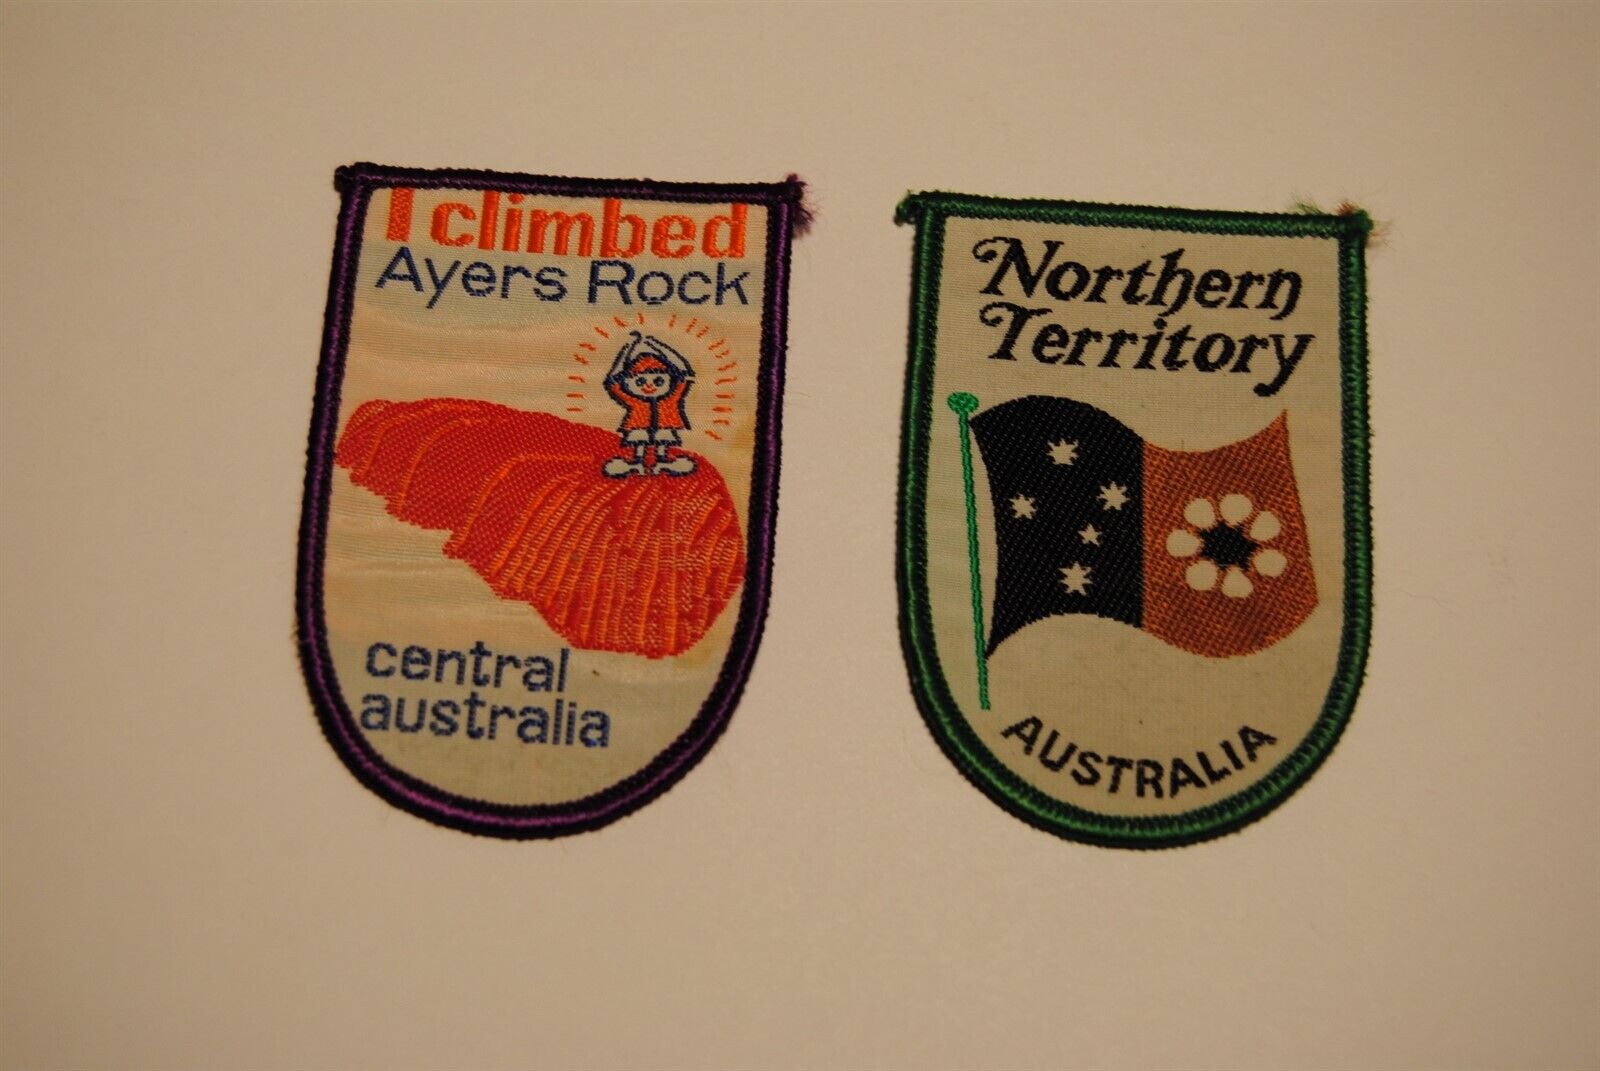 2 Vintage Australia Patches I Climbed Ayers Rock & Northern Territory